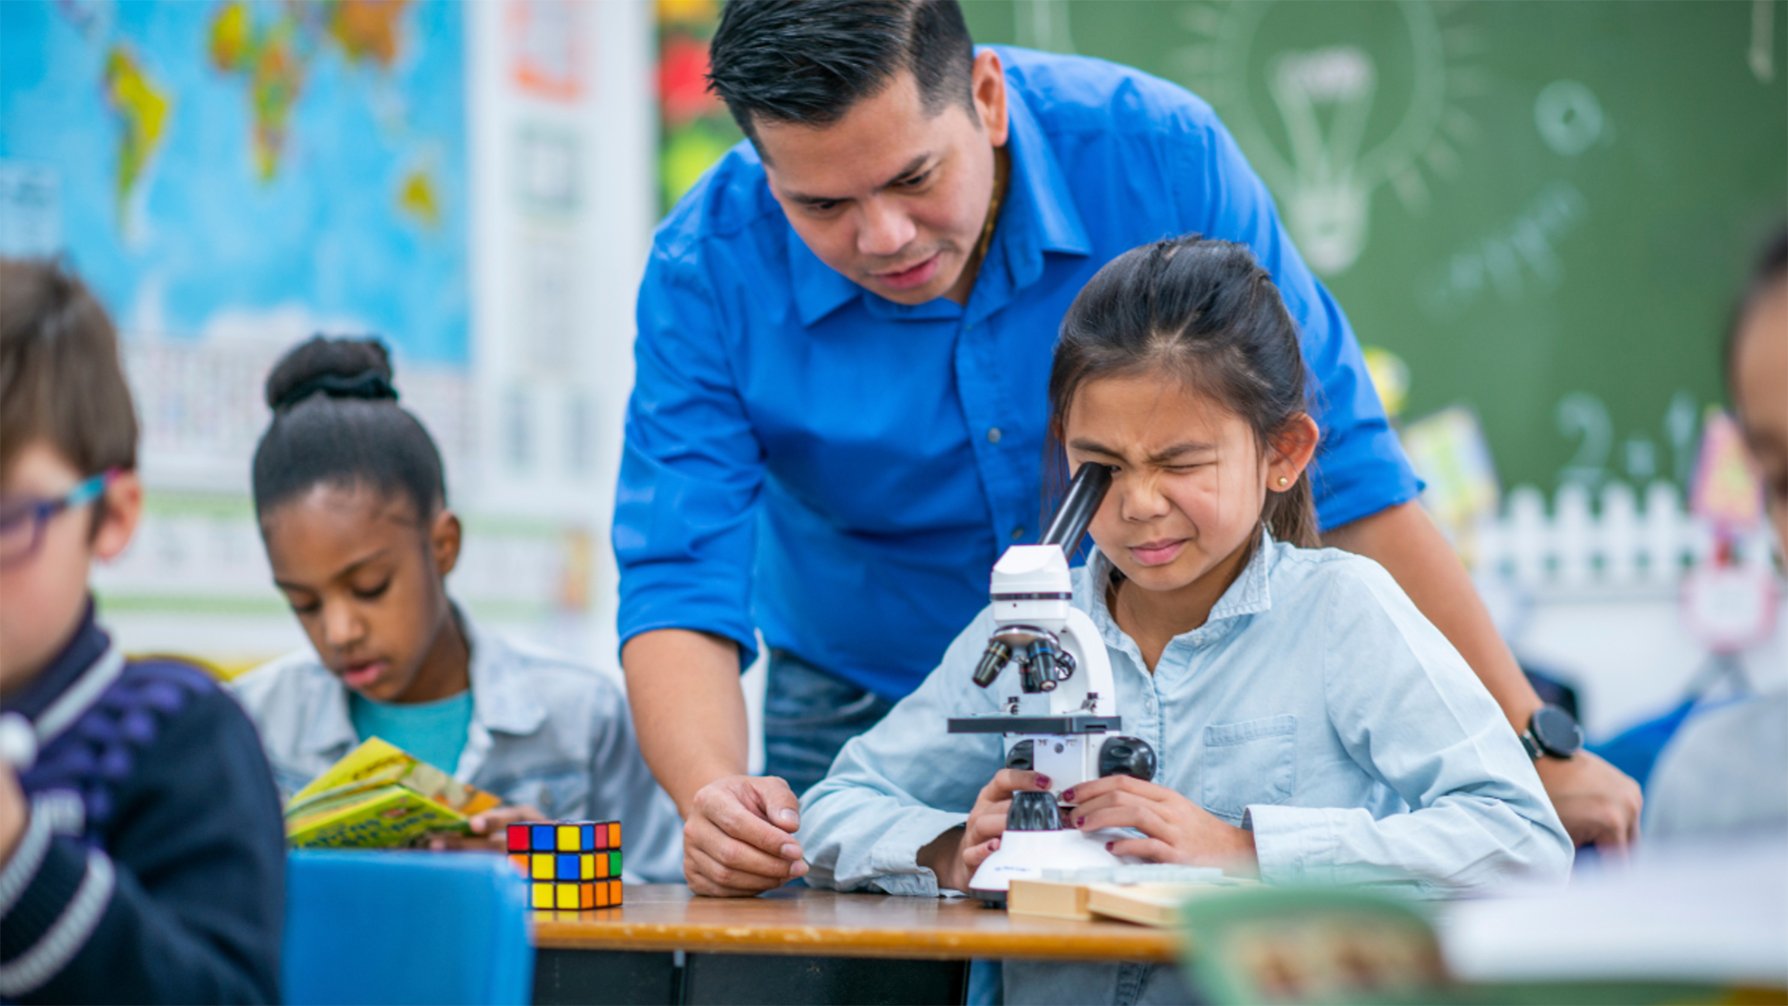 Student looking into a microscope as teacher observes